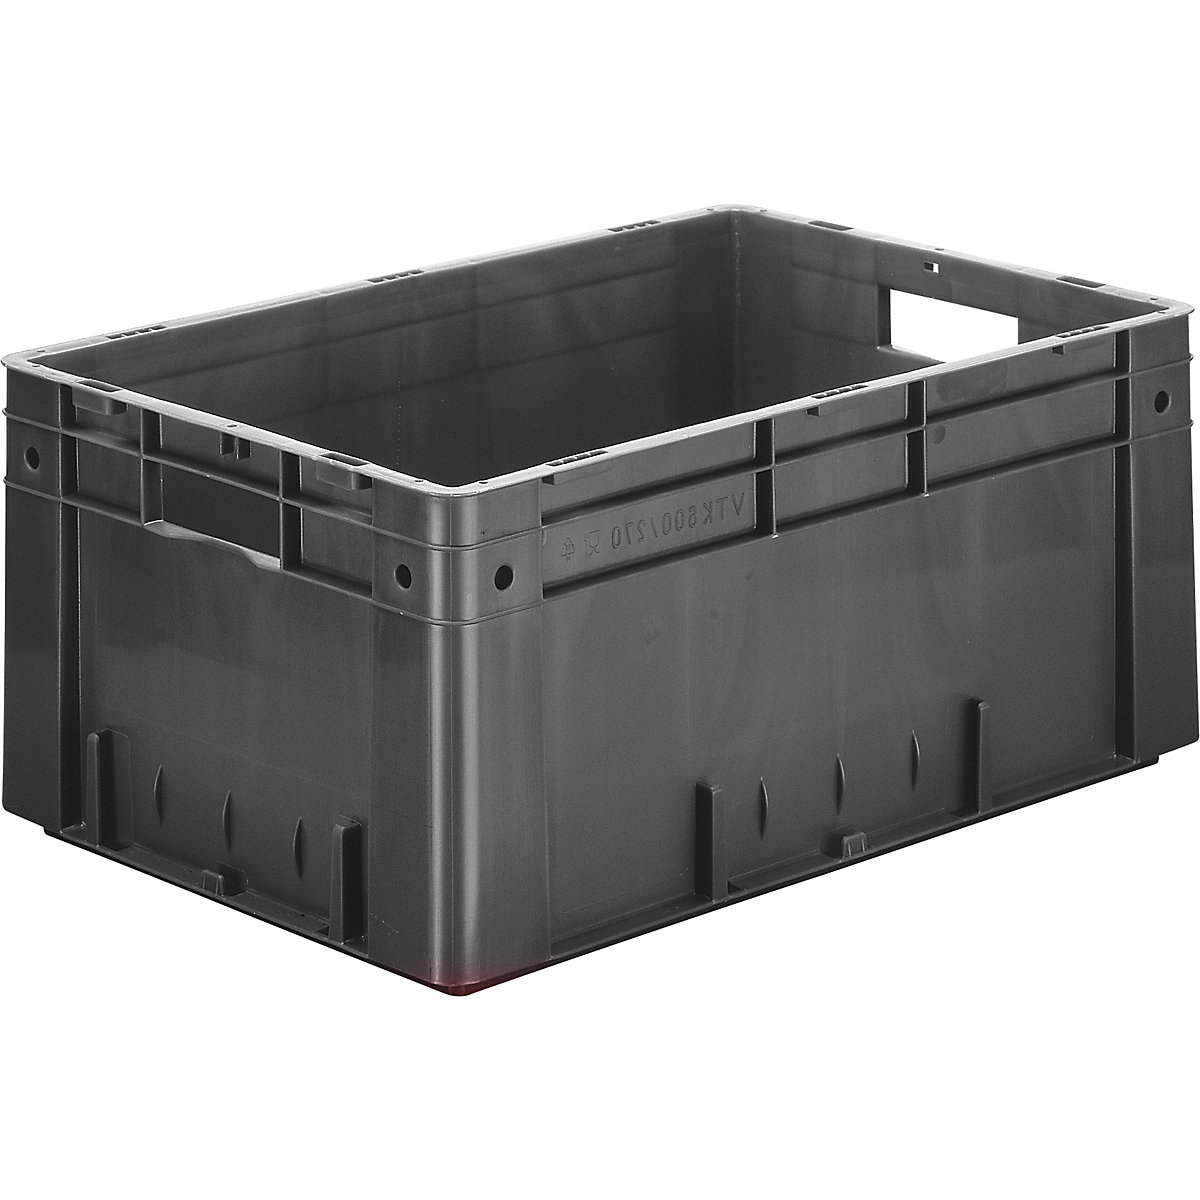 Heavy duty Euro container, polypropylene, capacity 50 l, LxWxH 600 x 400 x 270 mm, solid walls, solid base, grey, pack of 2-5